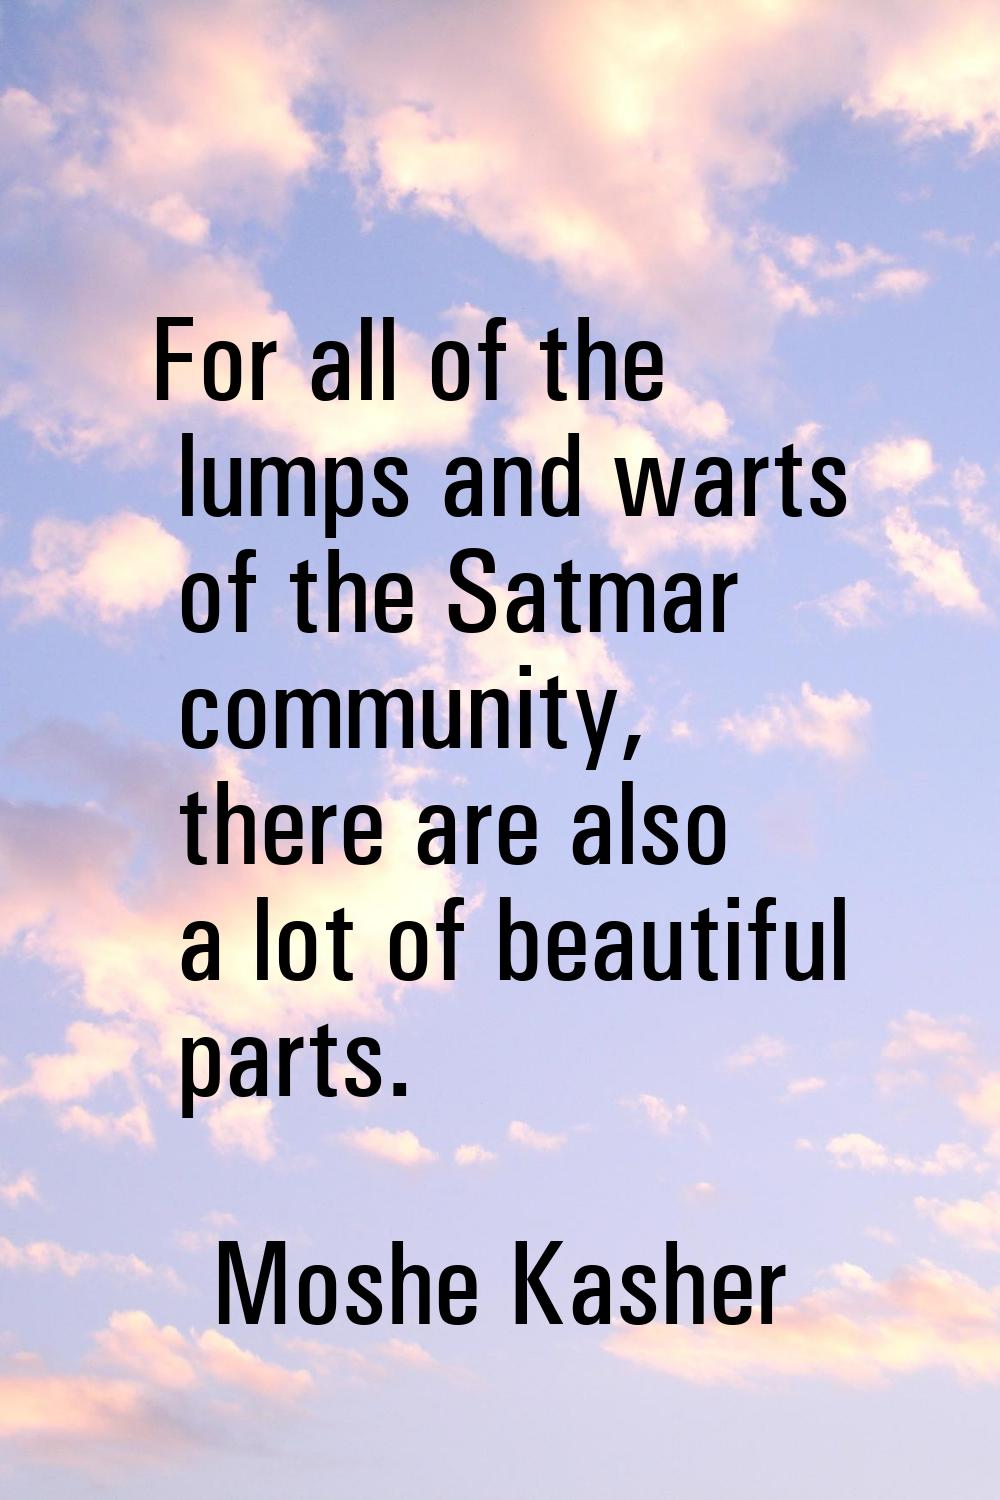 For all of the lumps and warts of the Satmar community, there are also a lot of beautiful parts.